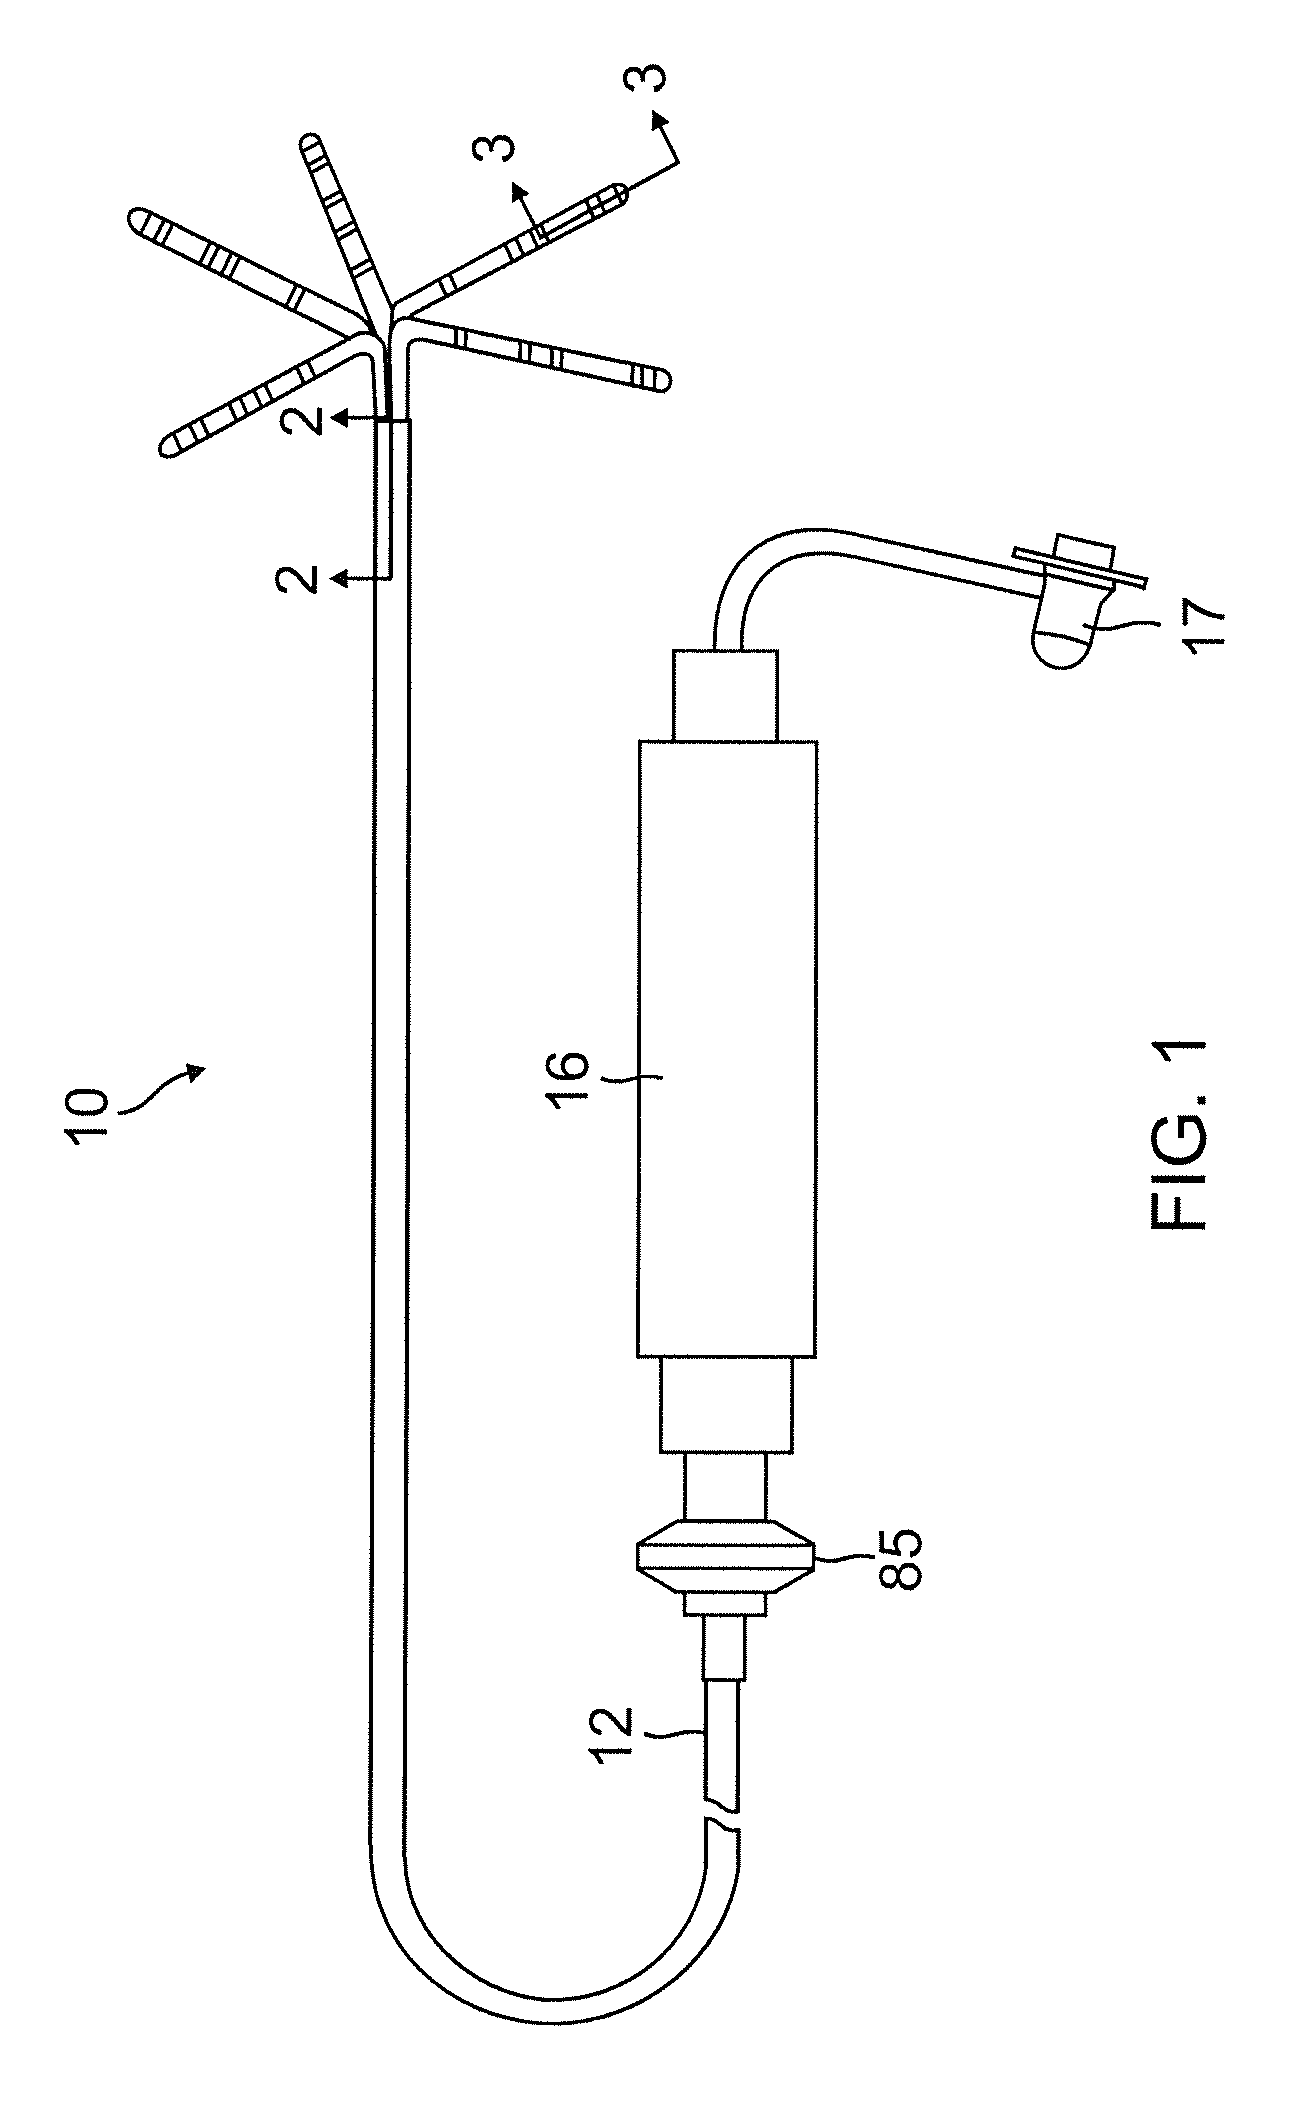 Flower catheter for mapping and ablating veinous and other tubular locations